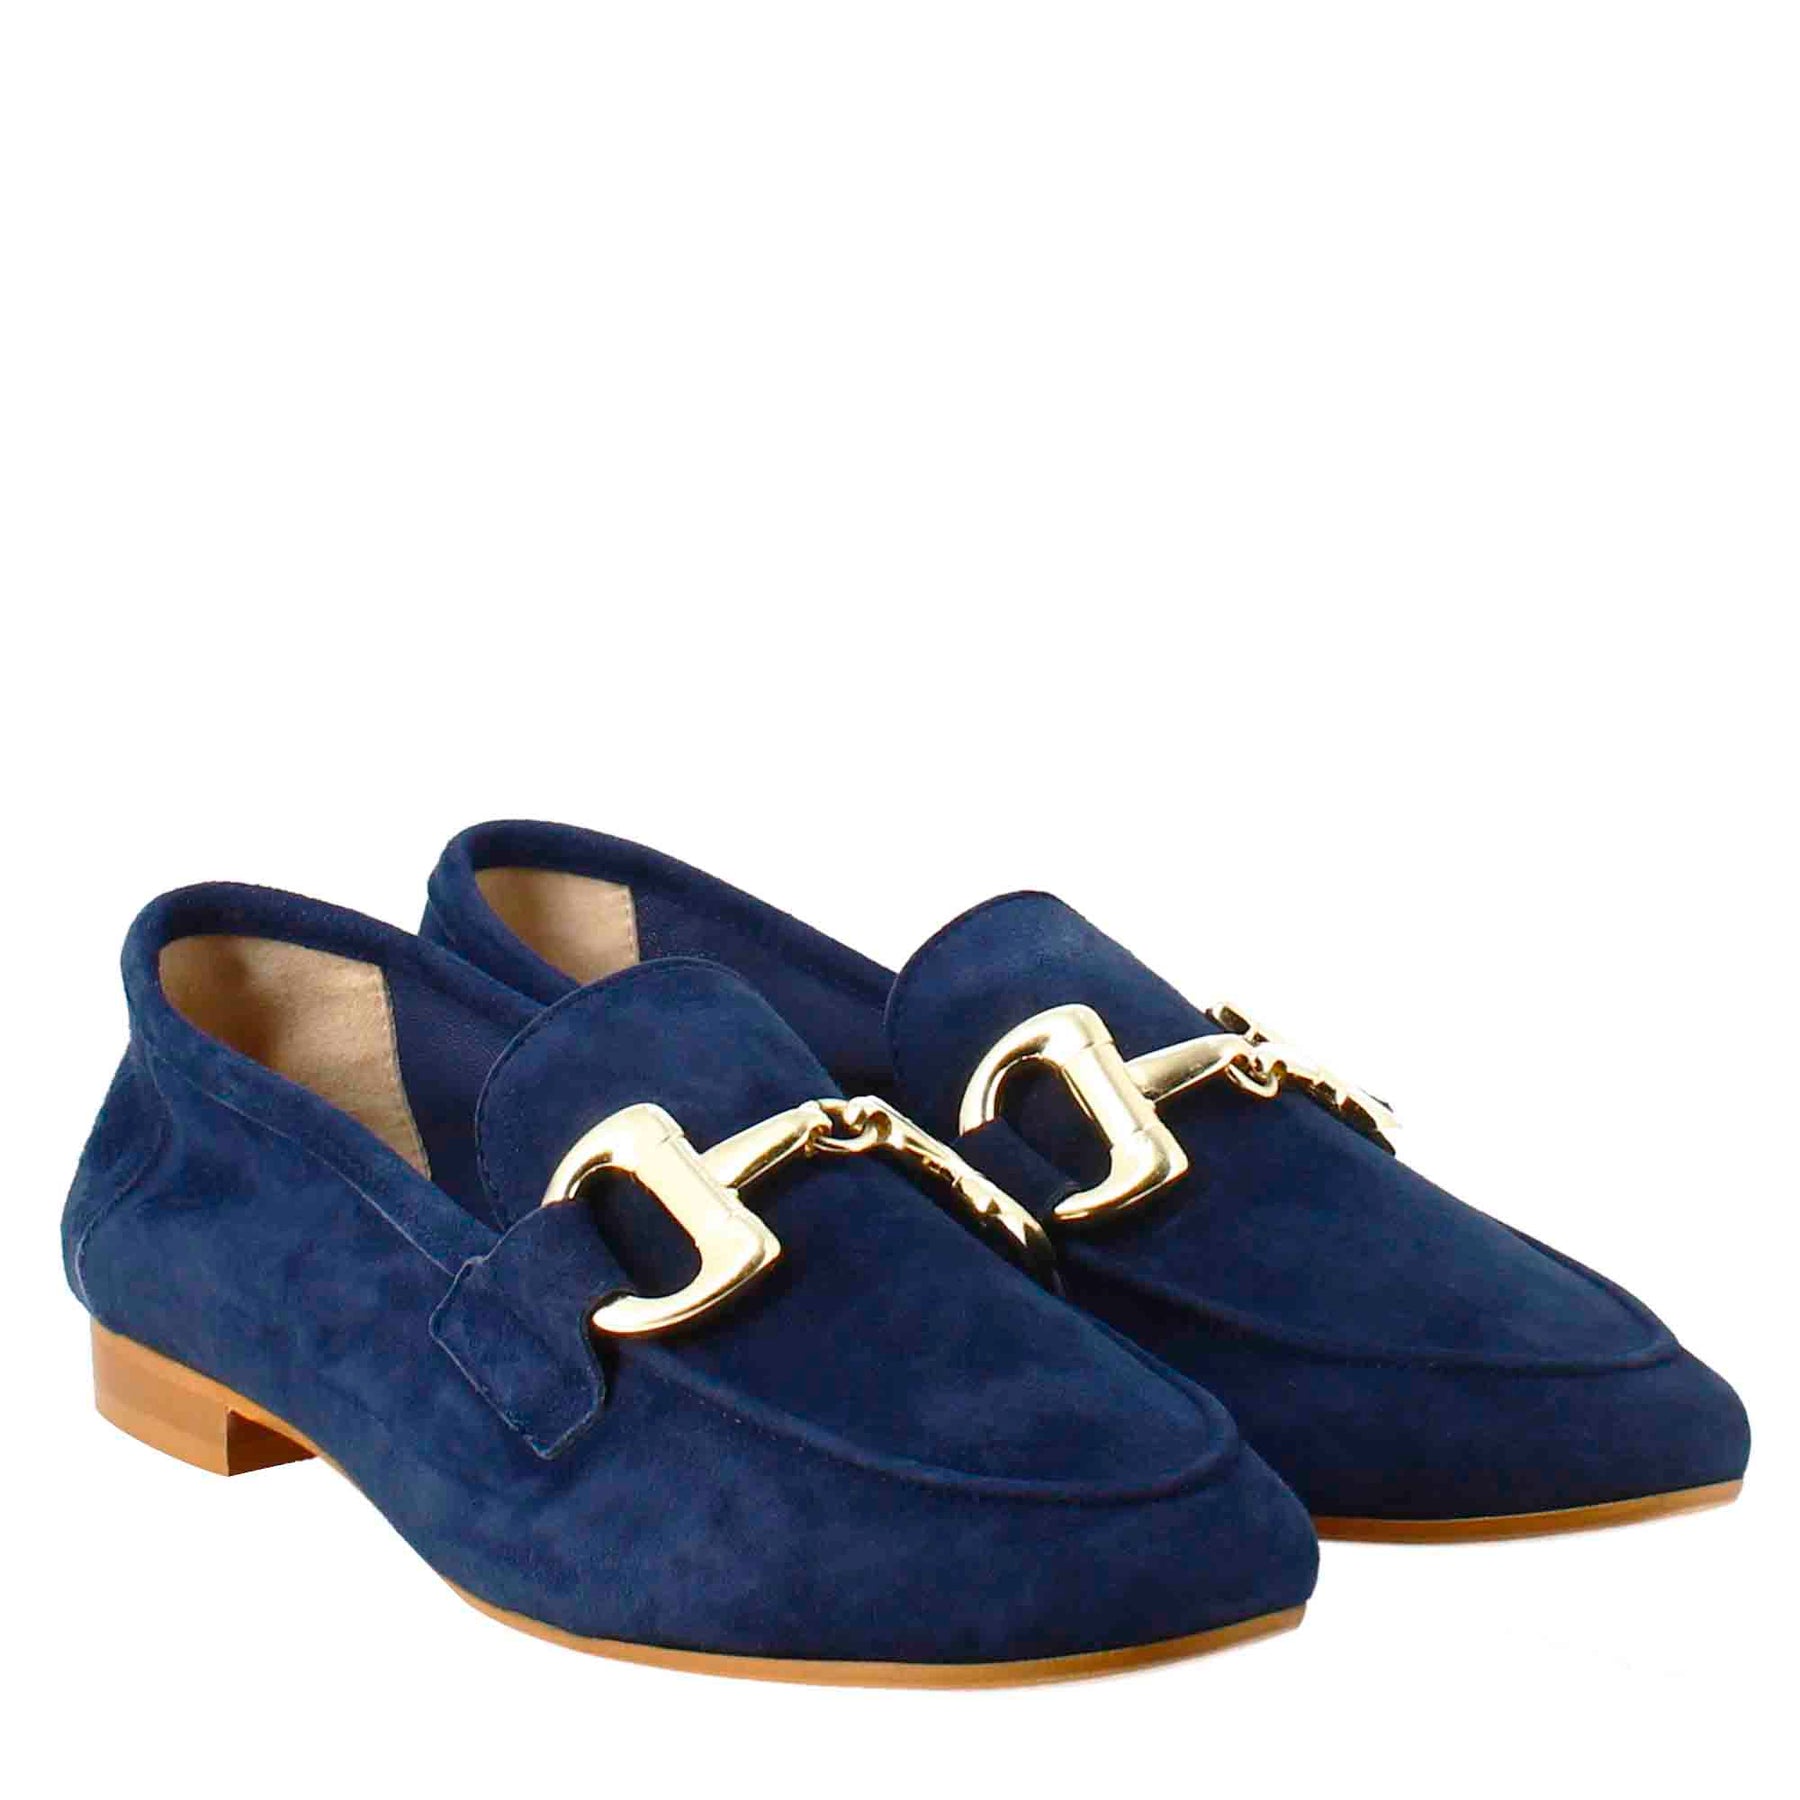 Women's moccasin in blue suede with gold buckle